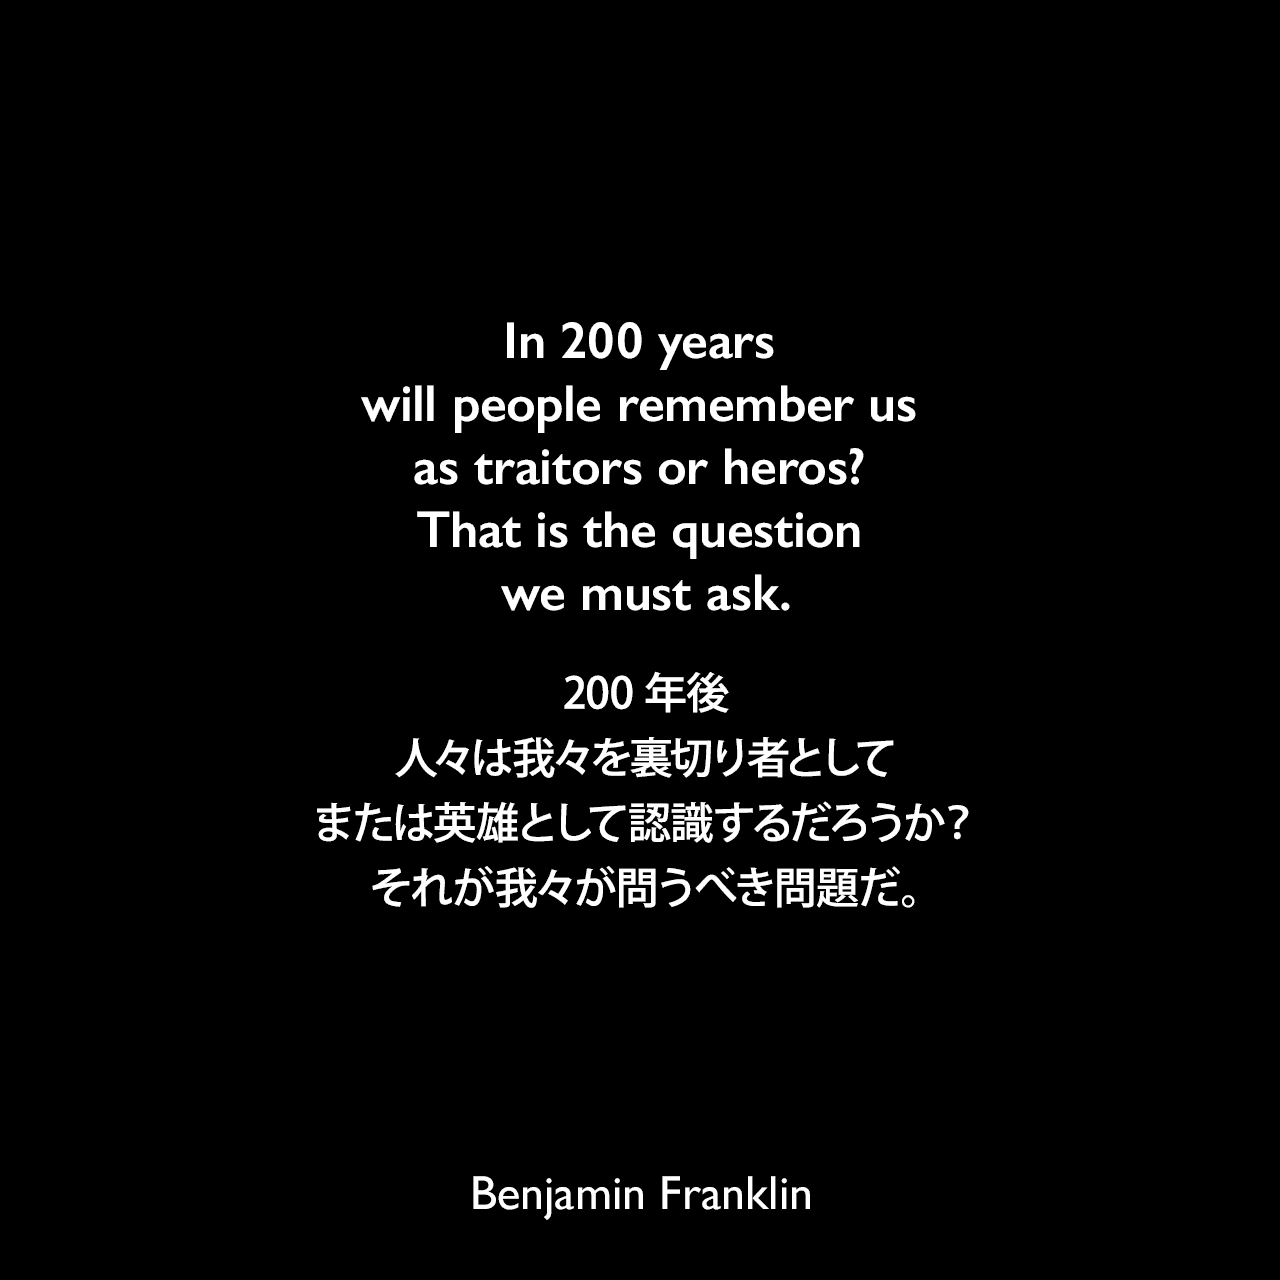 In 200 years will people remember us as traitors or heros? That is the question we must ask.200年後、人々は我々を裏切り者として、または英雄として認識するだろうか？それが我々が問うべき問題だ。- 1775年3月16日 ベンジャミン・フランクリンがトーマス・ジェファーソンに宛てた手紙Benjamin Franklin